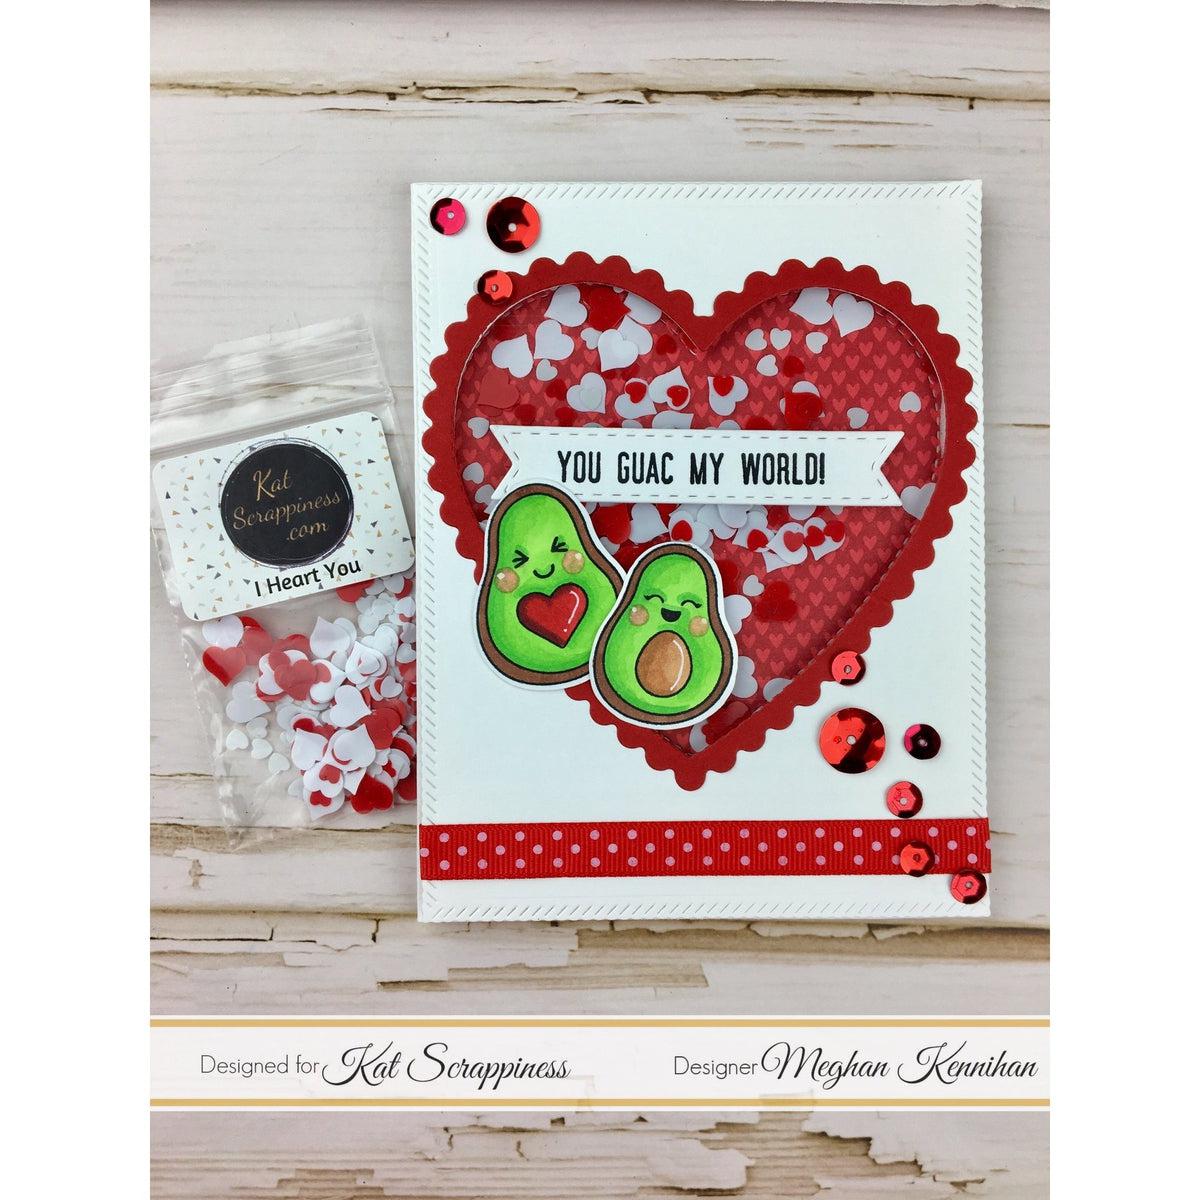 Stitched Scalloped Heart Dies by Kat Scrappiness - Kat Scrappiness